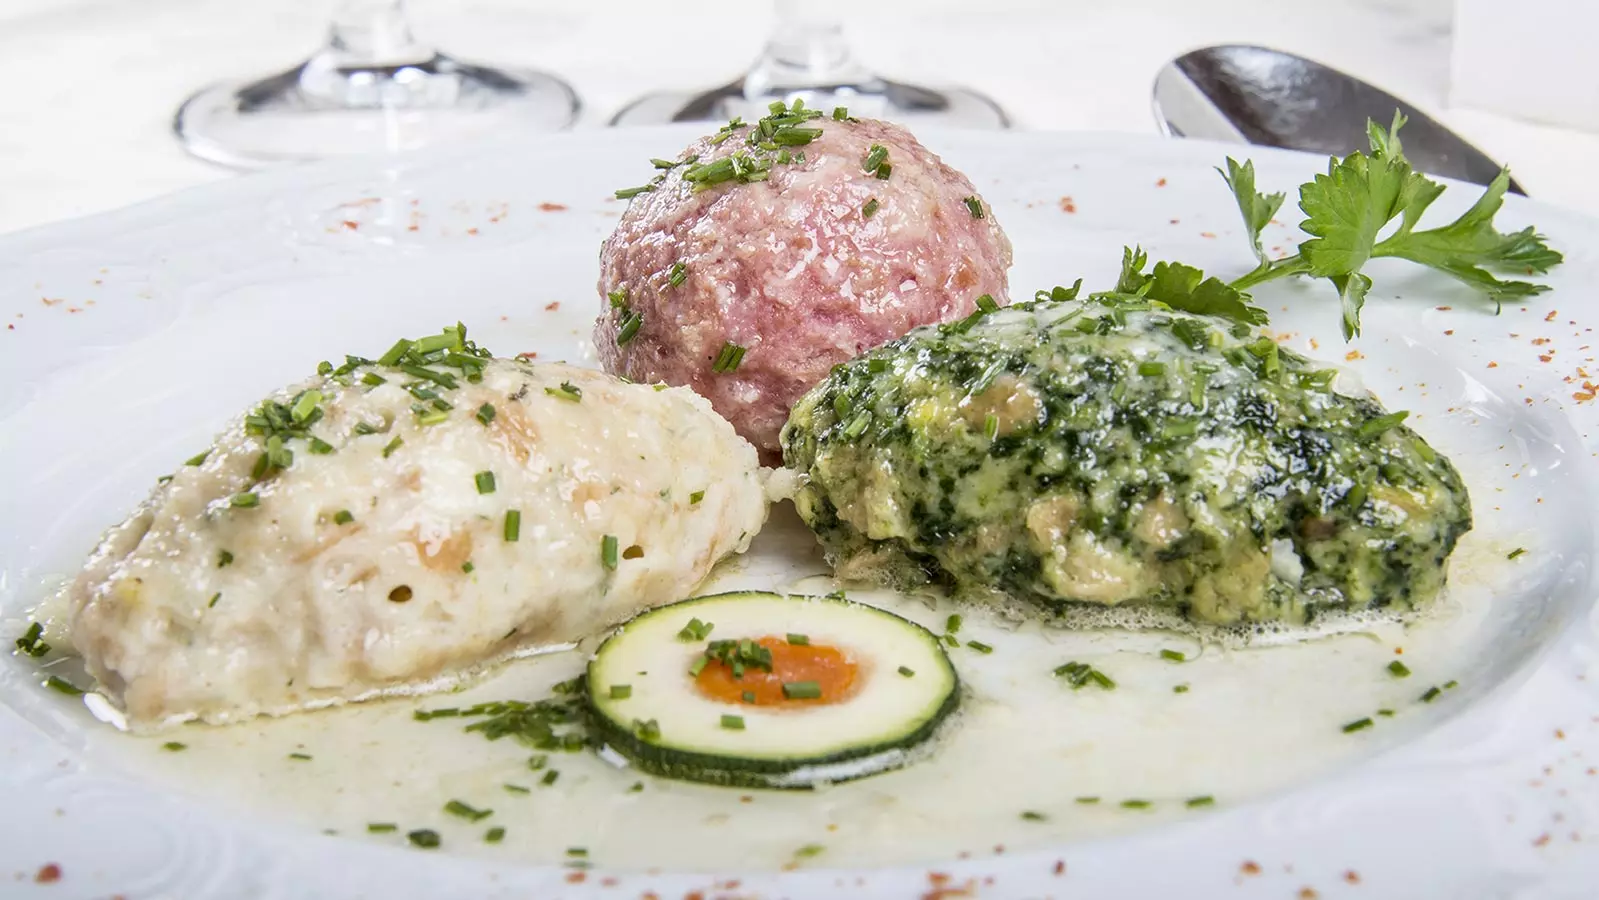 A tris of cheese -, spinach - and turnip - dumplings, served with melted butter and parsley